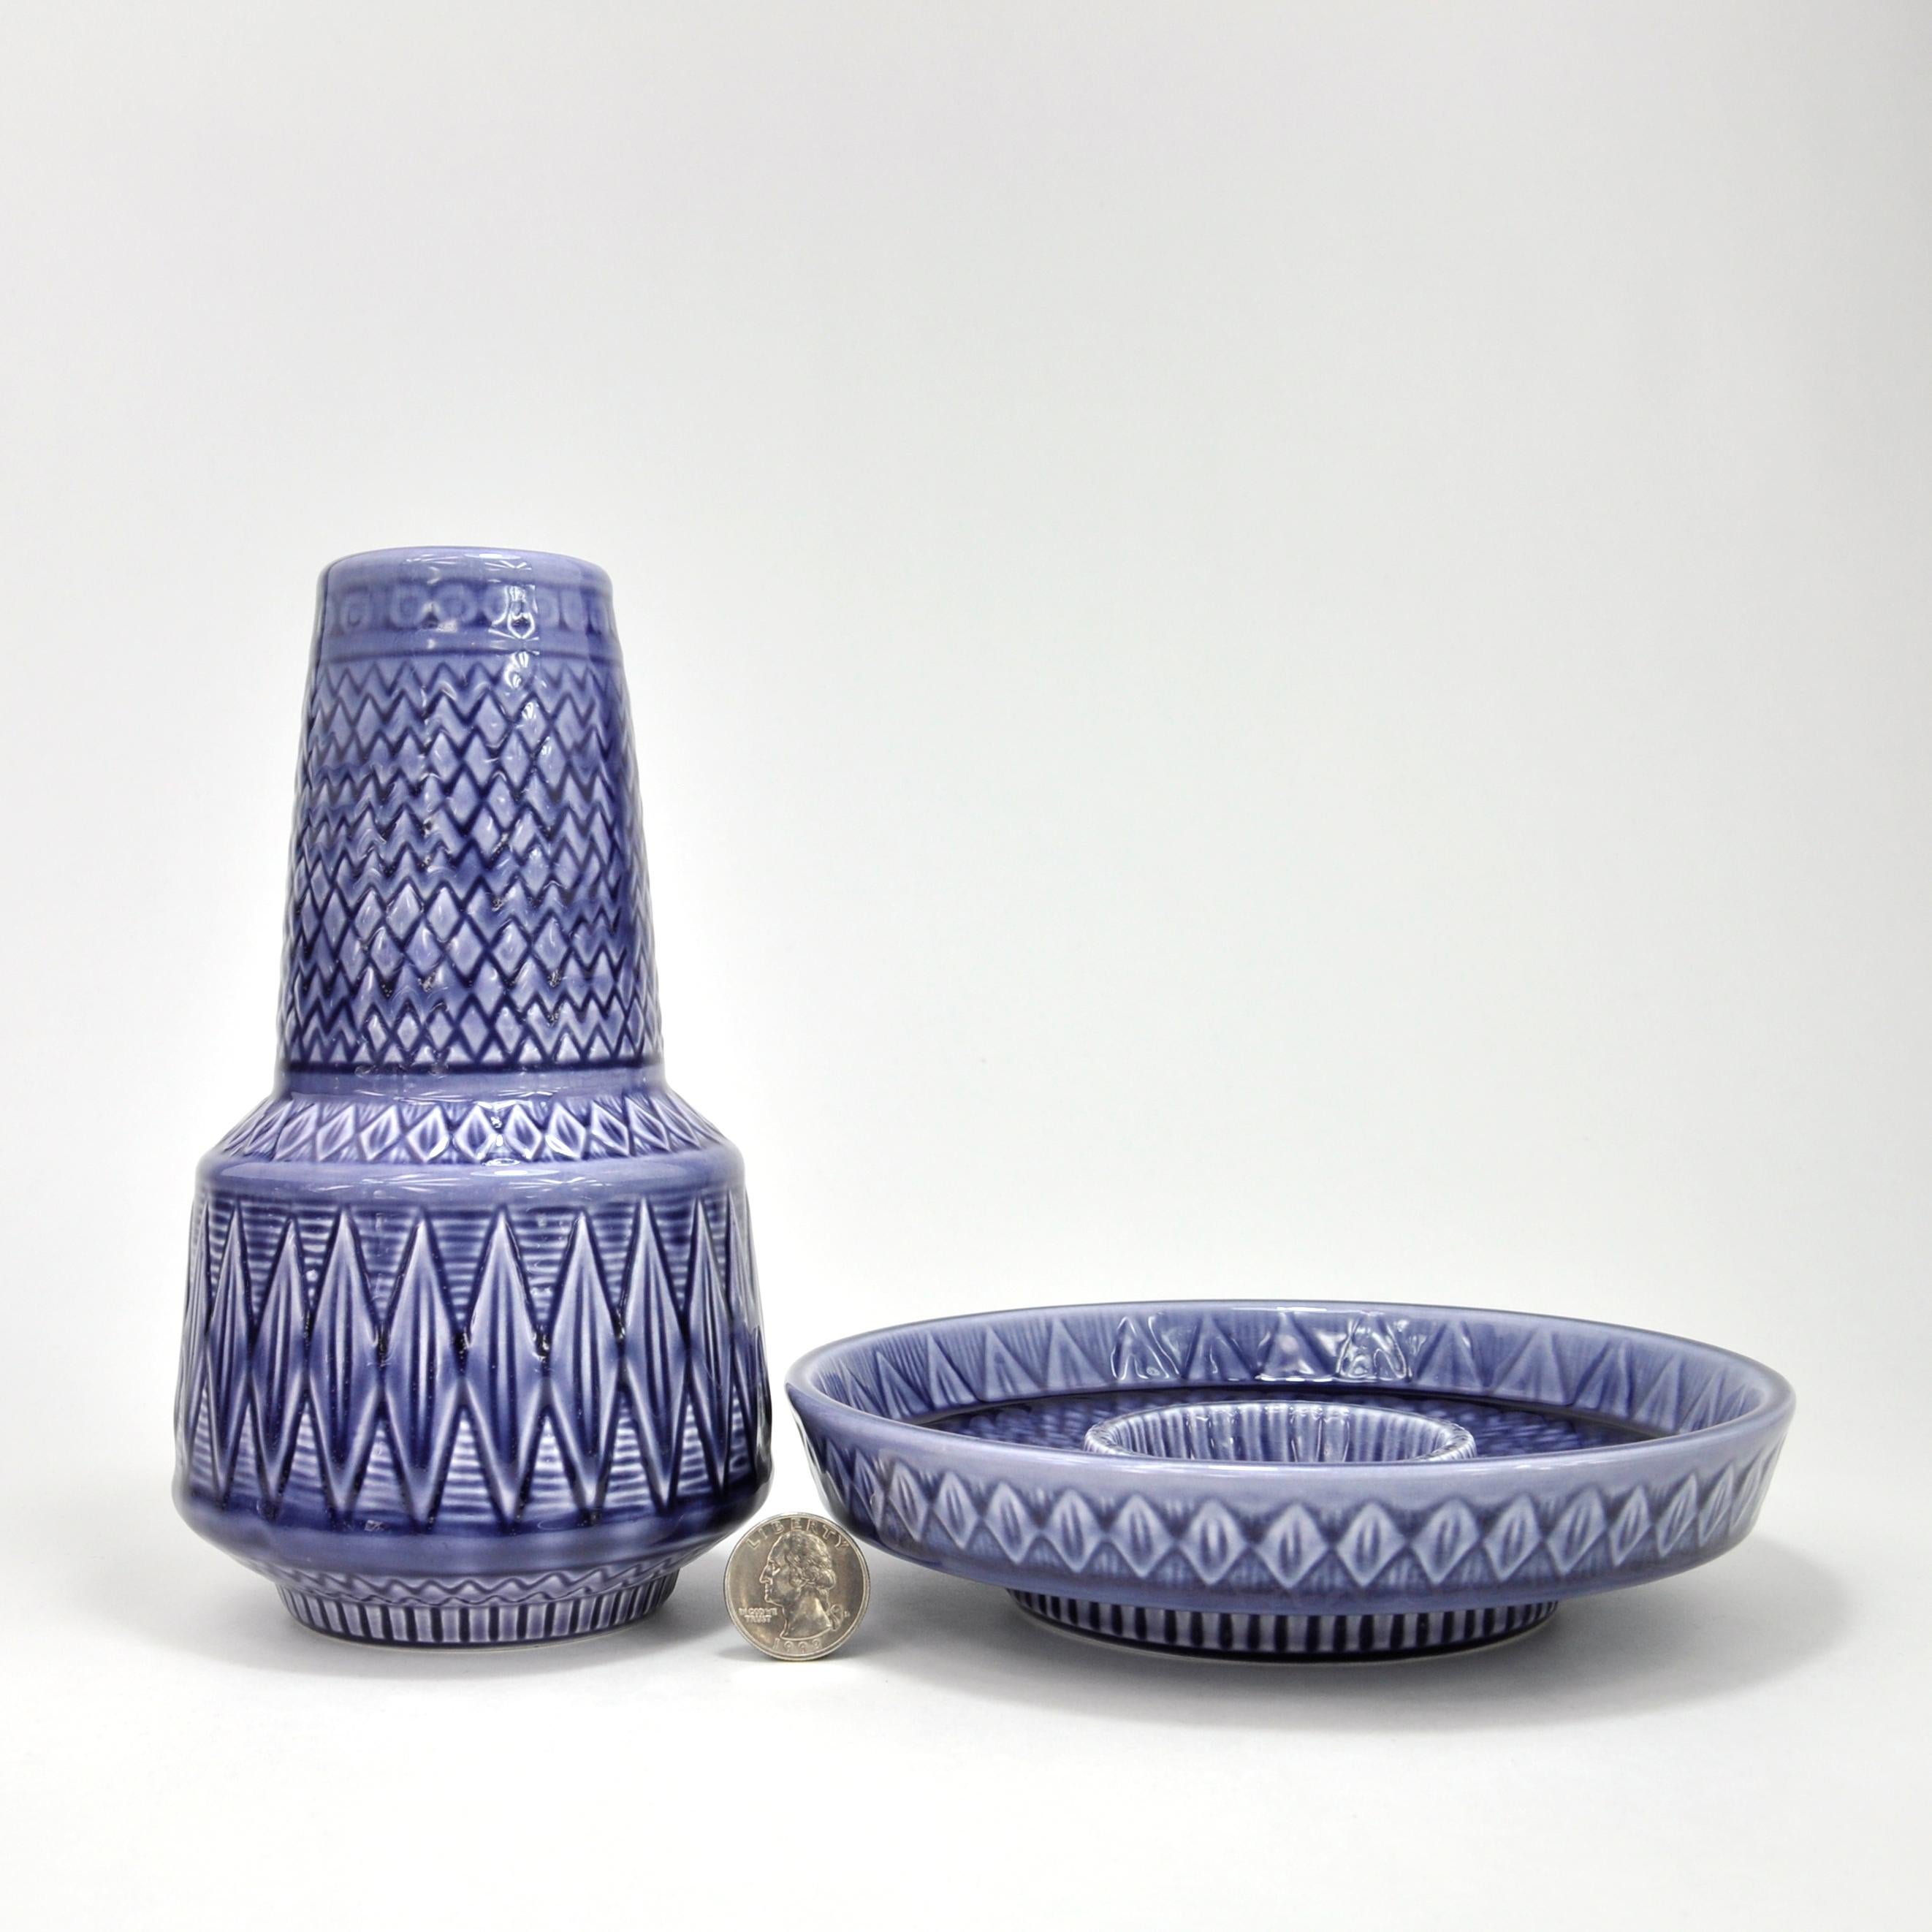 Gunnar Nylund is one of the most respected Swedish ceramic designers of the 20th century. Nylund began his career at Bing & Grondahl’s Porcelain Factory in Copenhagen (1925-1929) before he started the Saxbo Workshop together with Nathalie Krebs in